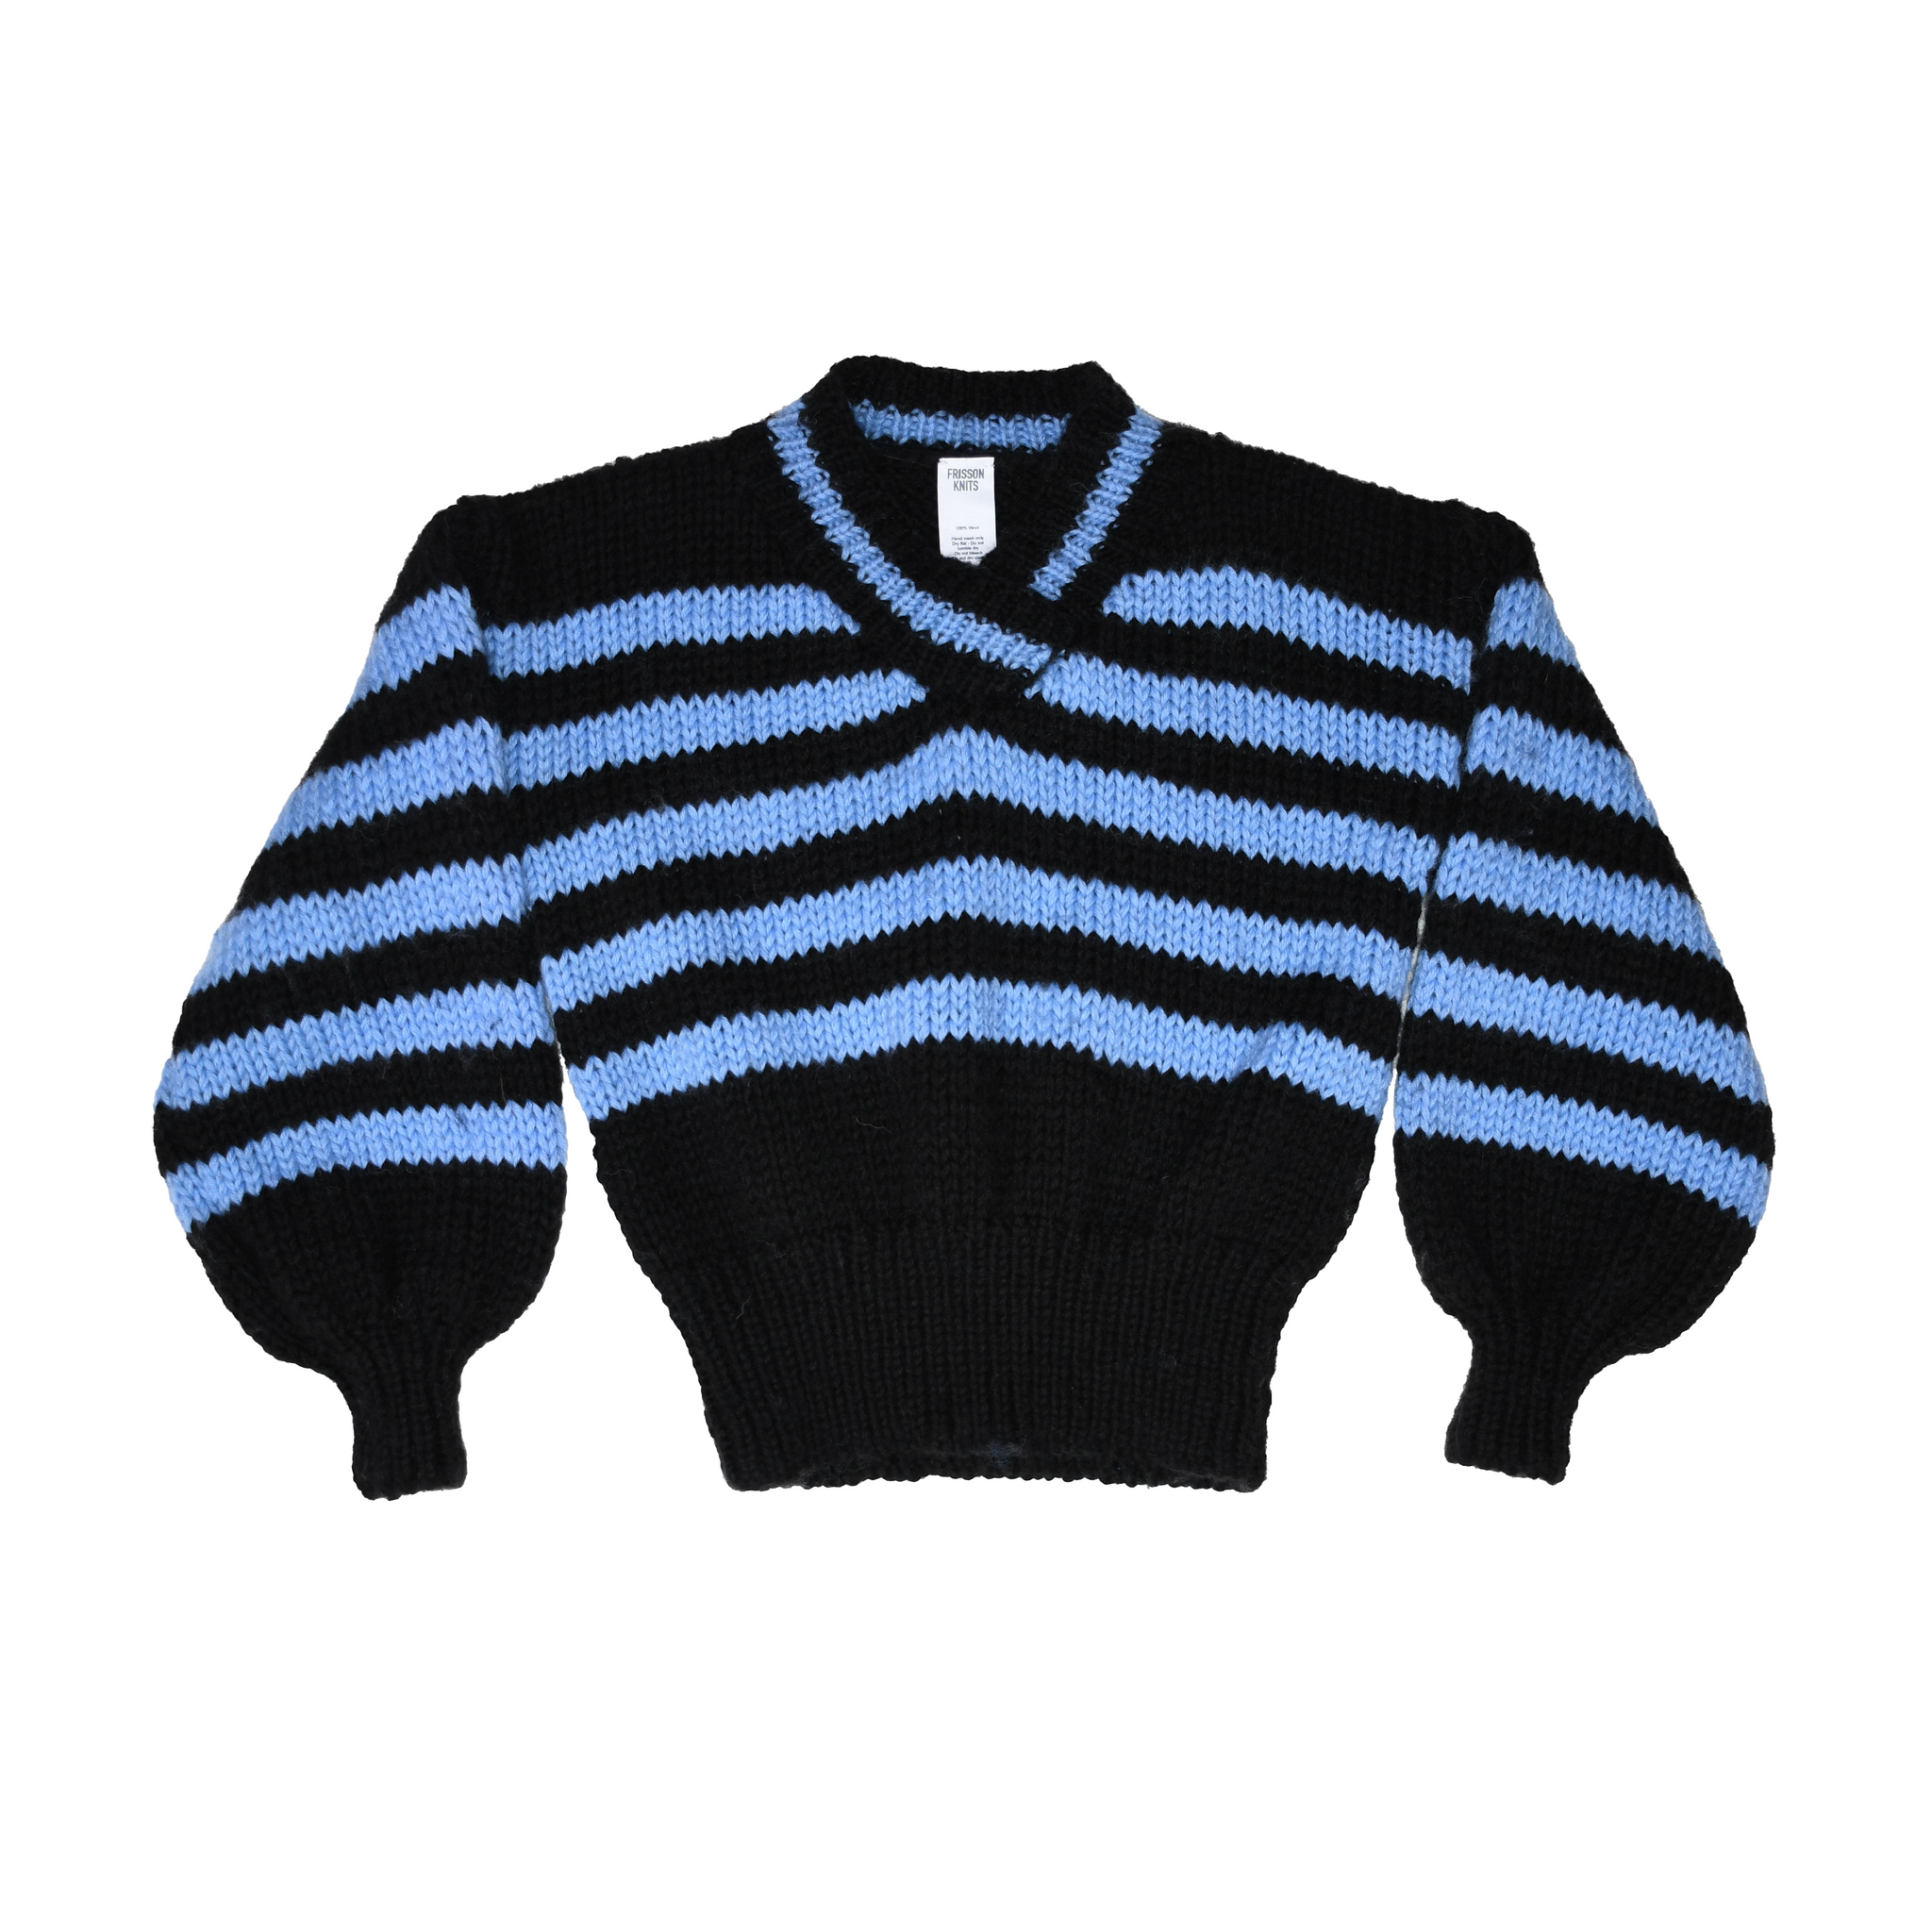 Frisson Knits - 5 Stripe Blue and Black Sweater